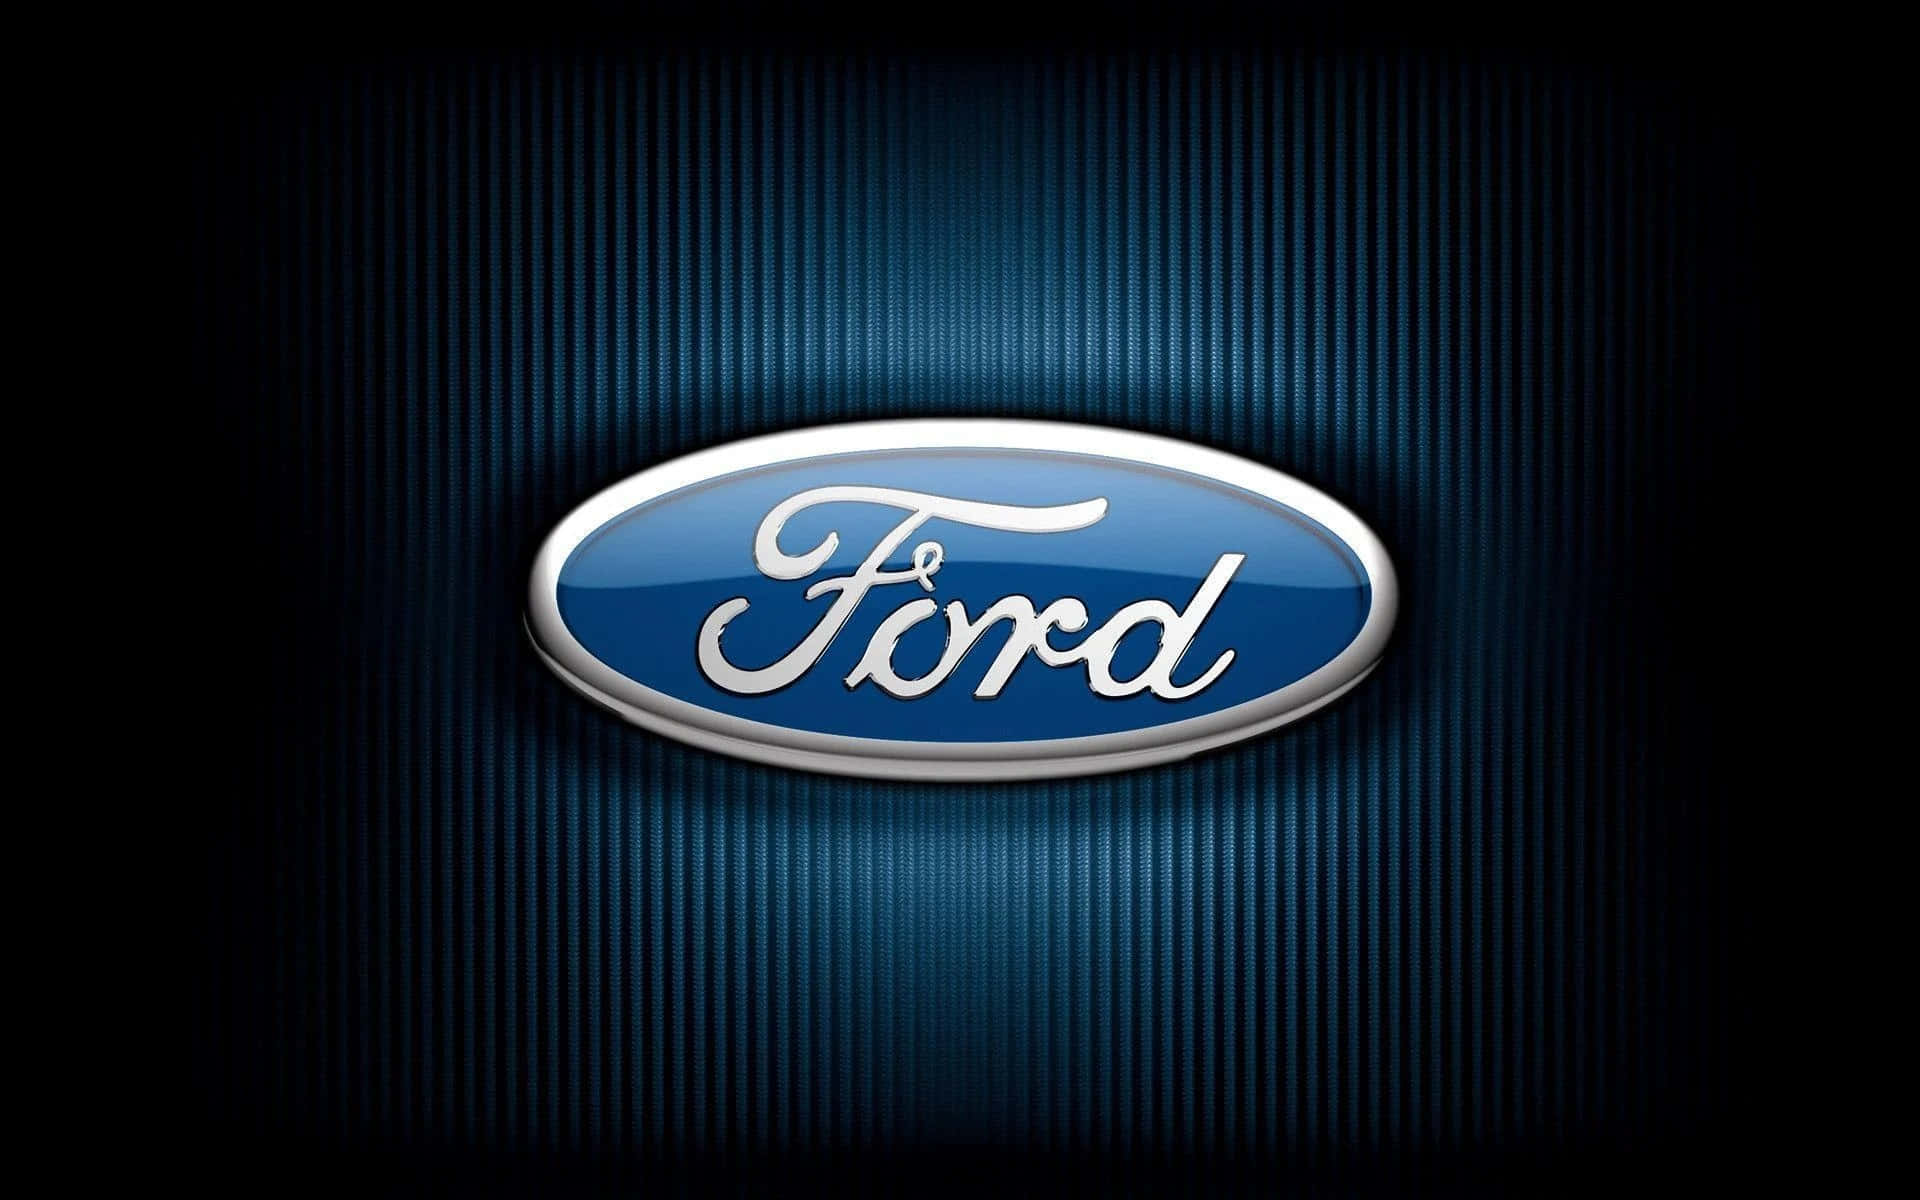 "The strength of Ford's history"